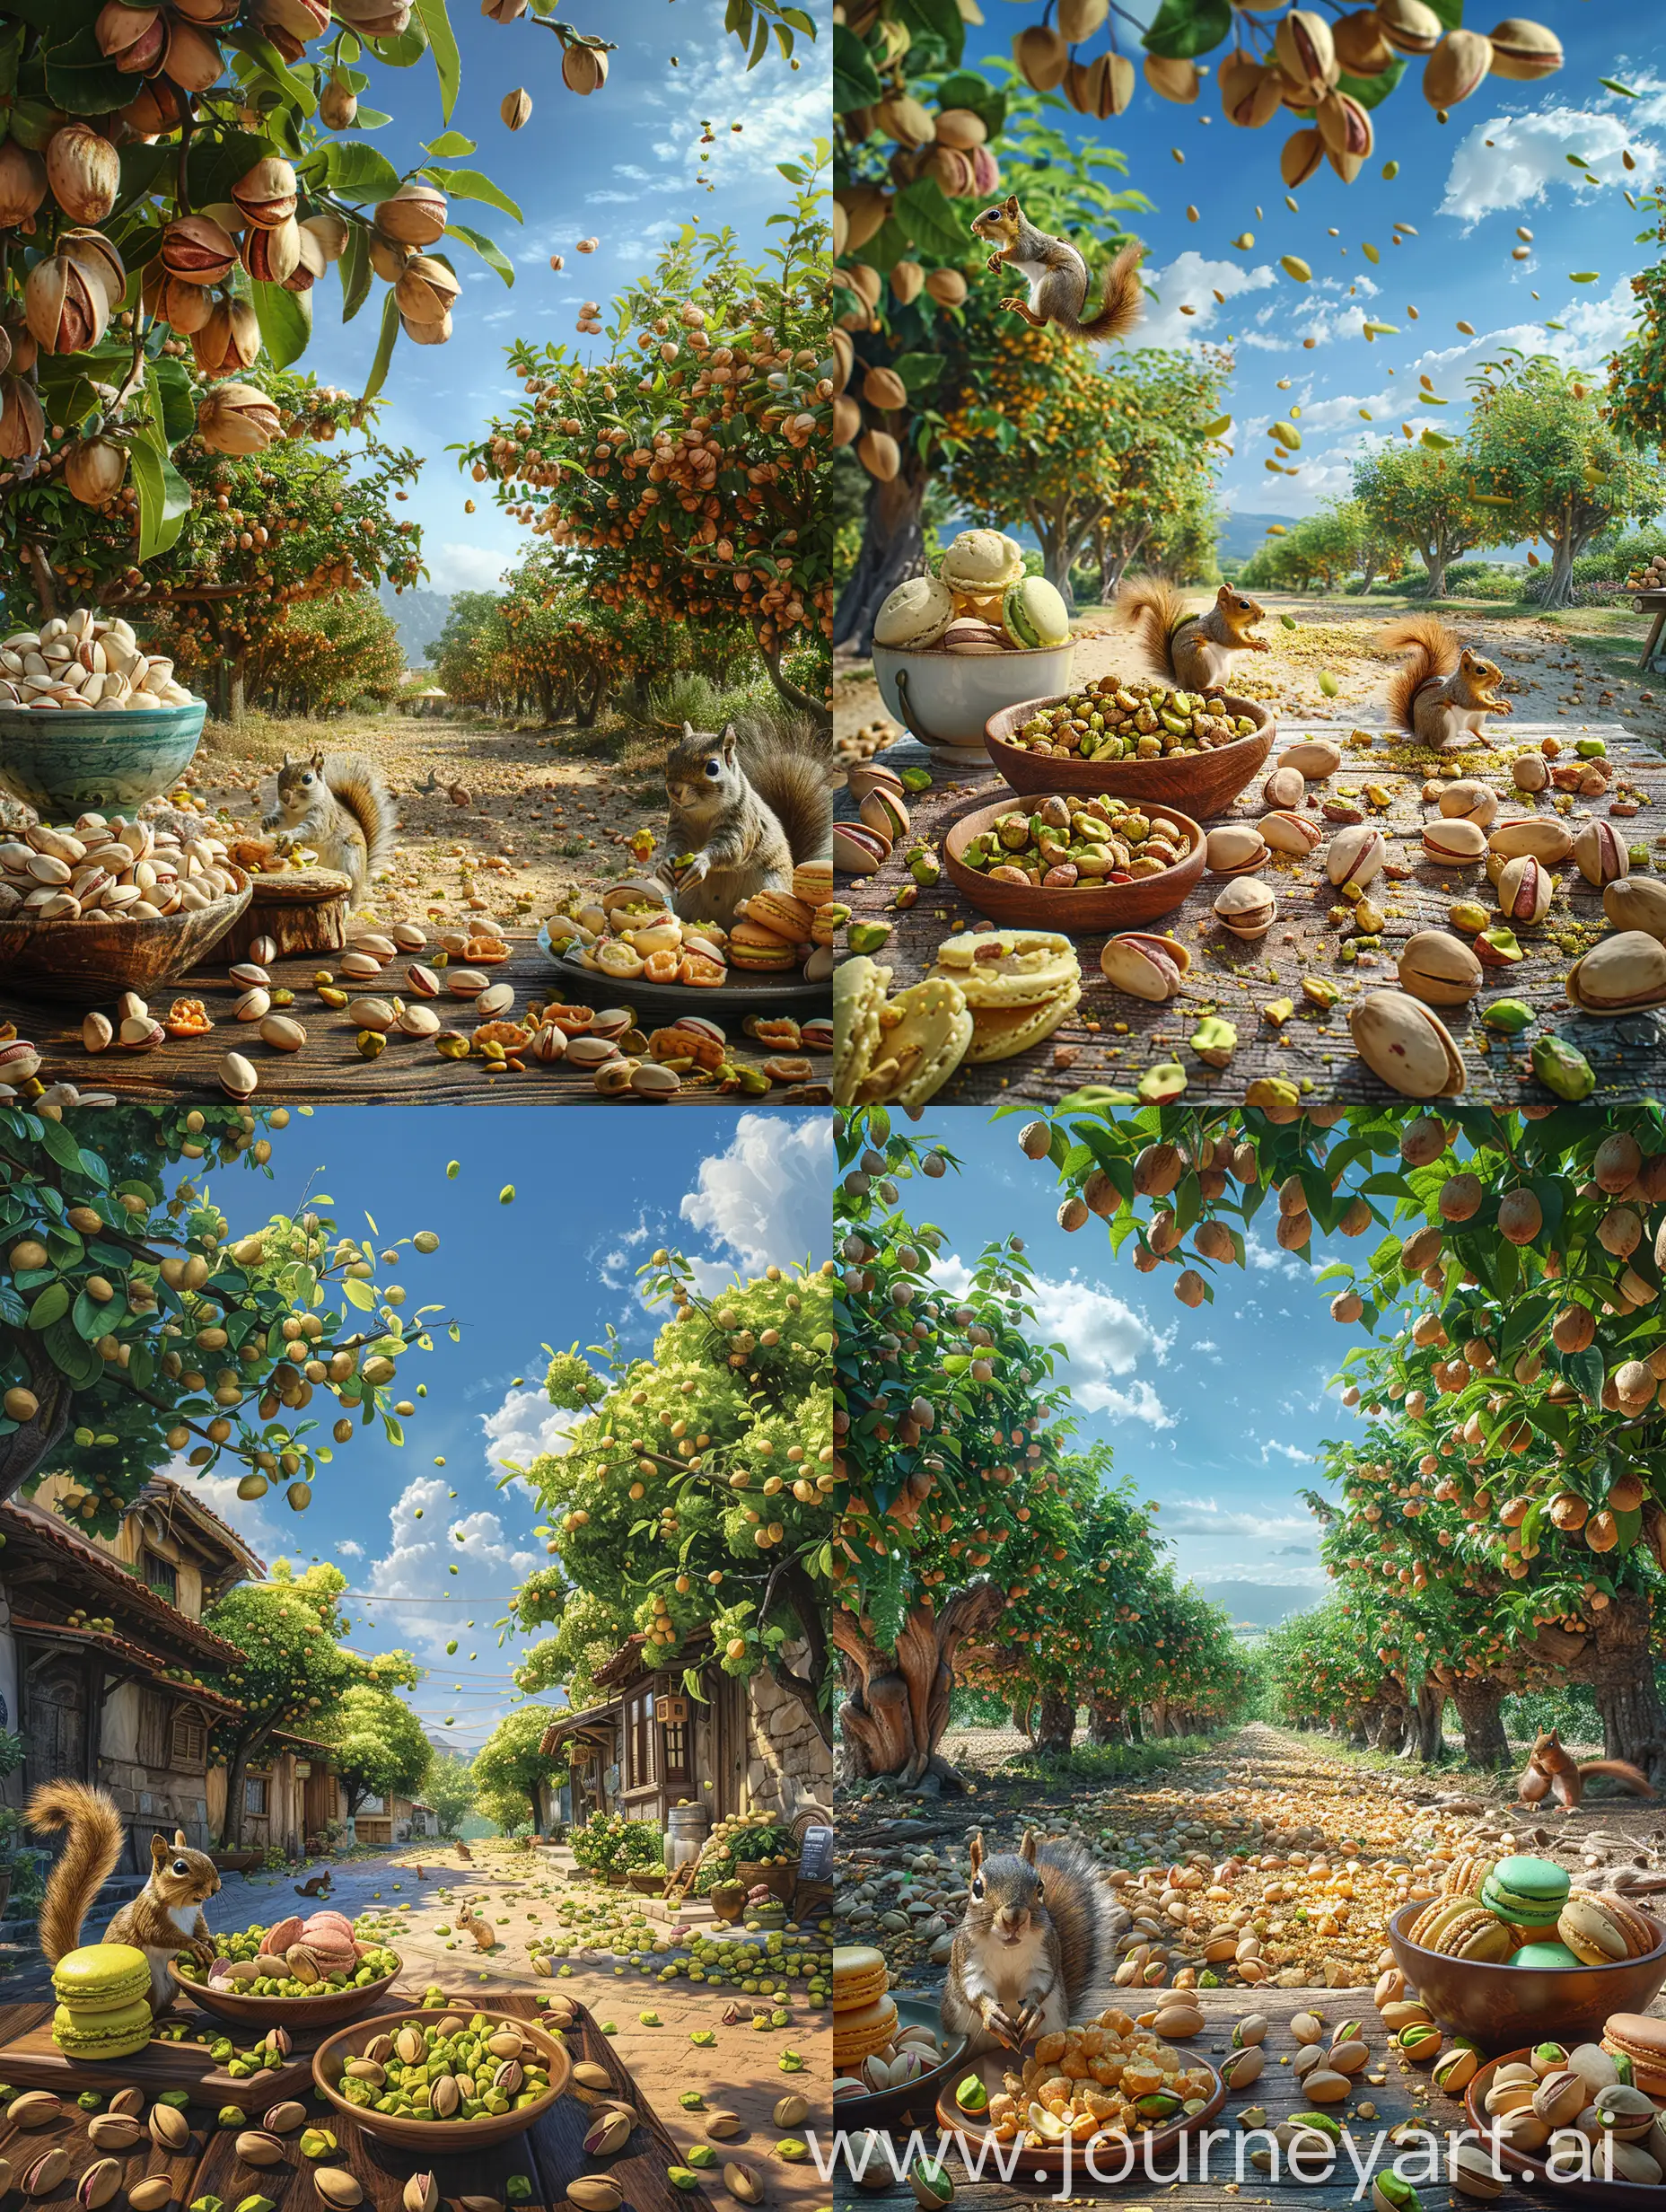 Create an image of a vibrant pistachio orchard under a clear blue sky, with the ground littered with ripe, cracked open pistachios. A few squirrels are playfully collecting the nuts. In the foreground, there is a rustic wooden table laden with various pistachio-based delicacies such as pistachio ice cream, pistachio macarons, and a bowl of shelled pistachios. --s 750